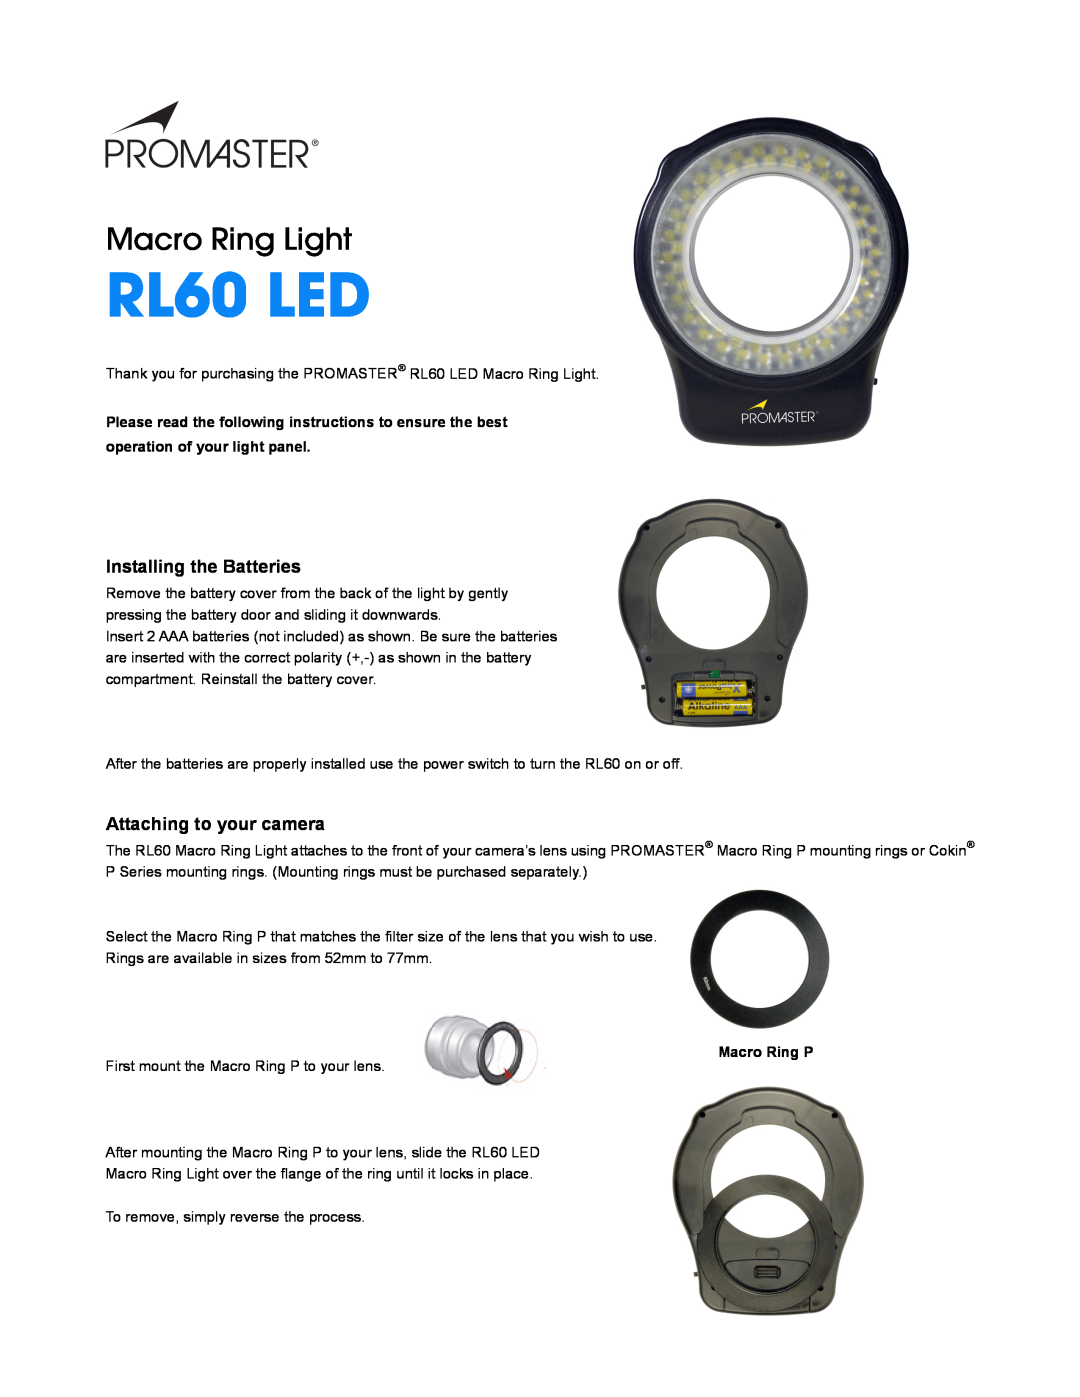 ProMaster manual Installing the Batteries, Attaching to your camera, RL60 LED, Macro Ring Light 